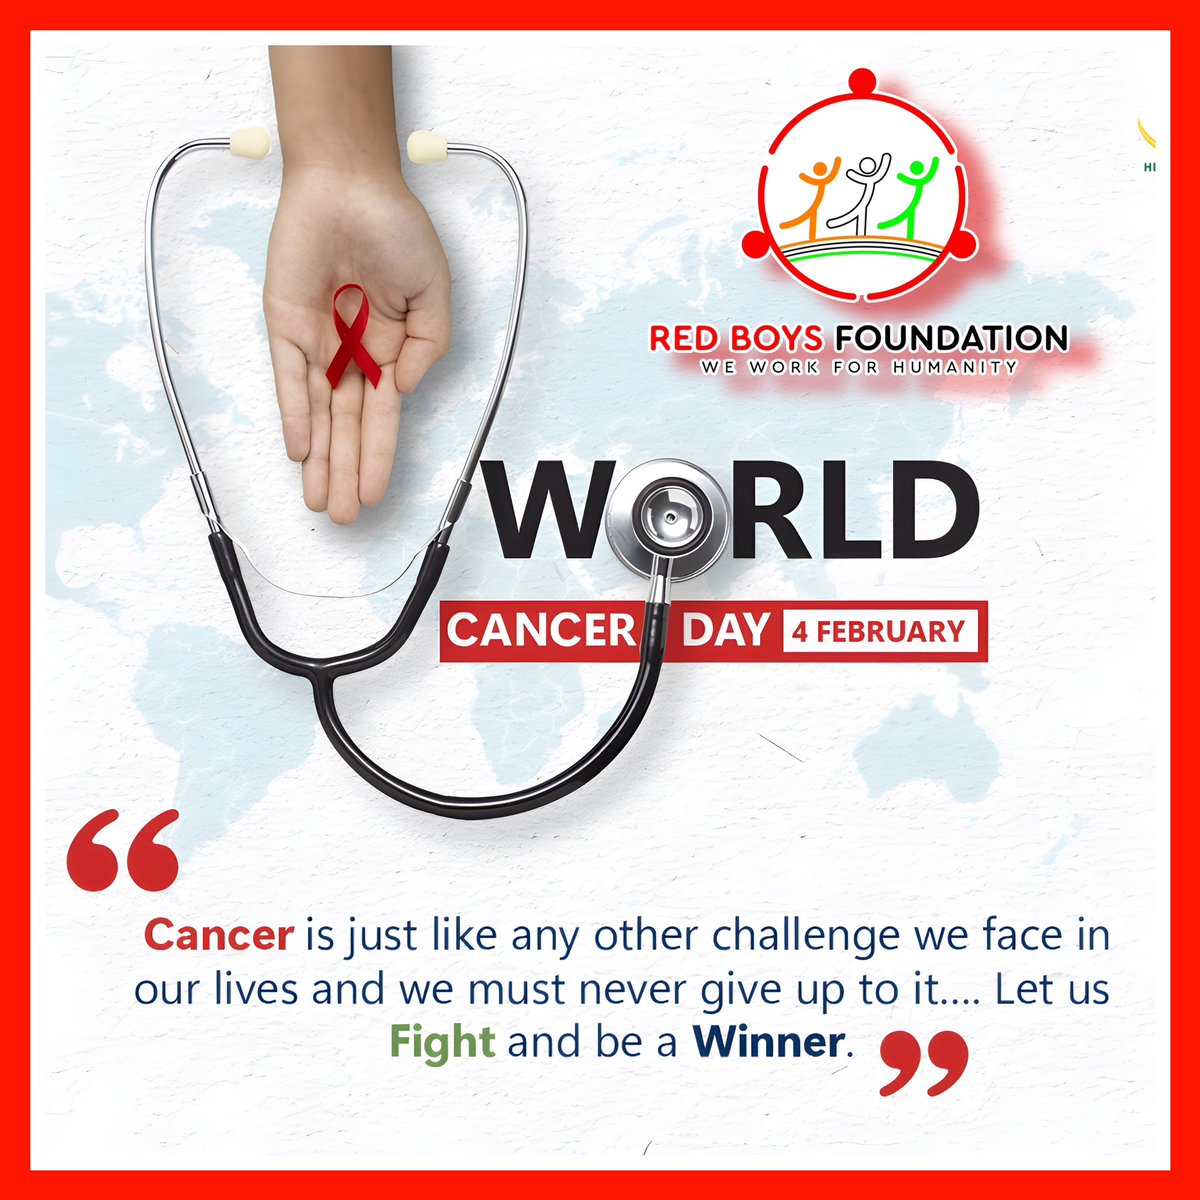 On World Cancer Day, let's make the world a better place through hope and support.
#Cancer #WorldCancerDay2023 #CancerAwareness #WorldCancerDay #redboysfoundation